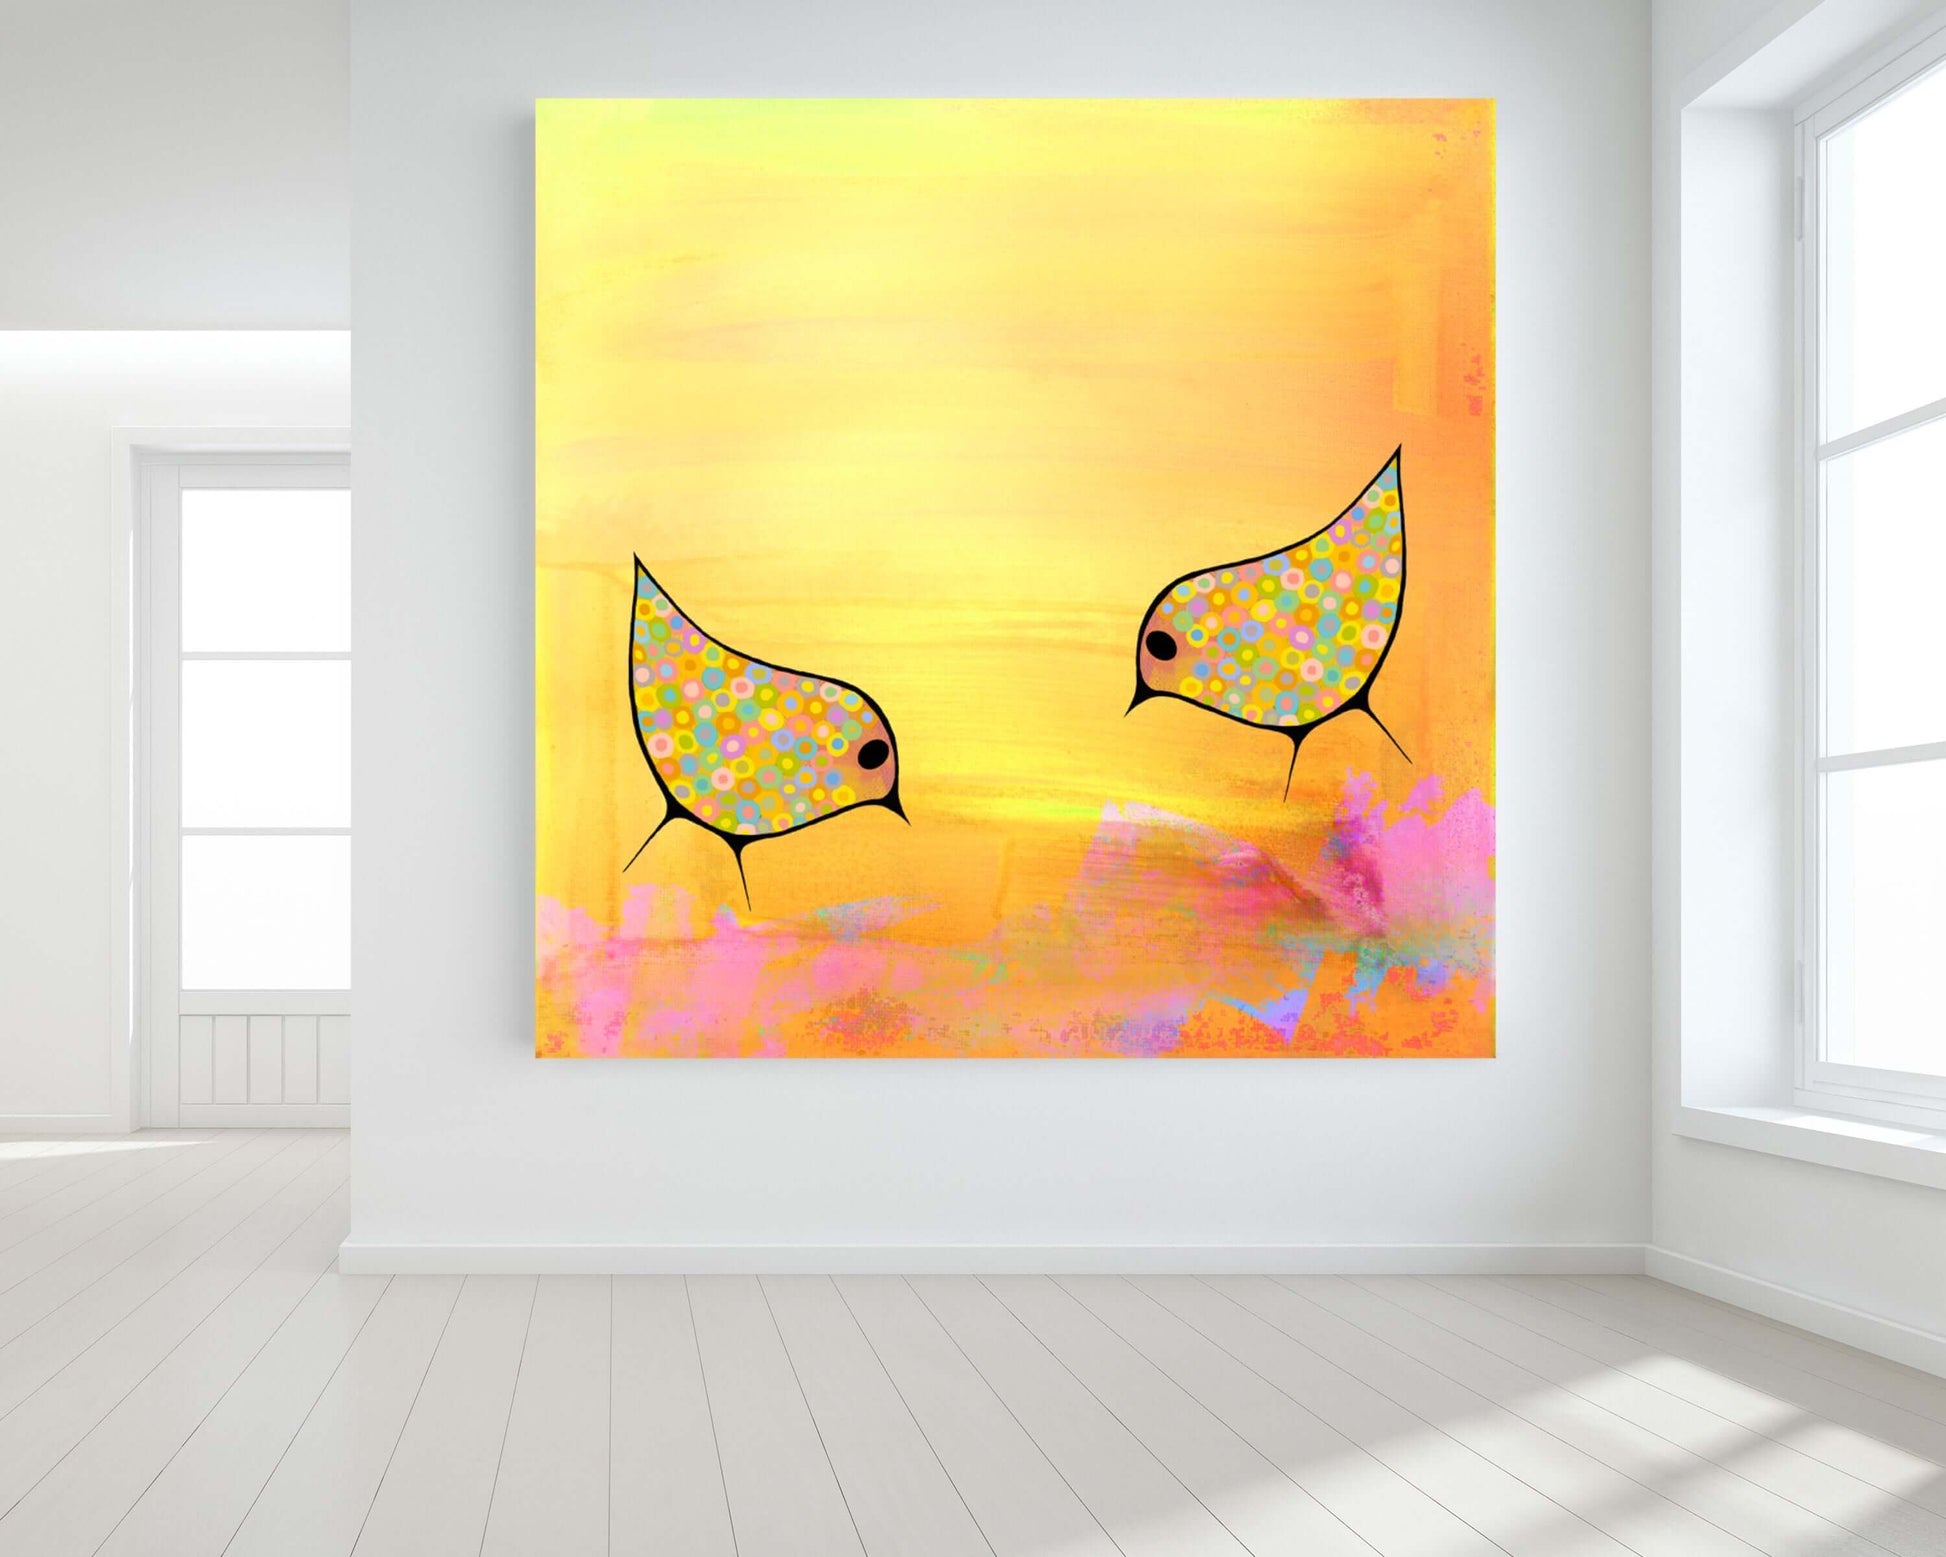 Two Yellow Birds on Sunny Yellow Mixed Media Background “Yellow Birds” Canvas Print Wall Art Large Canvas on Wall